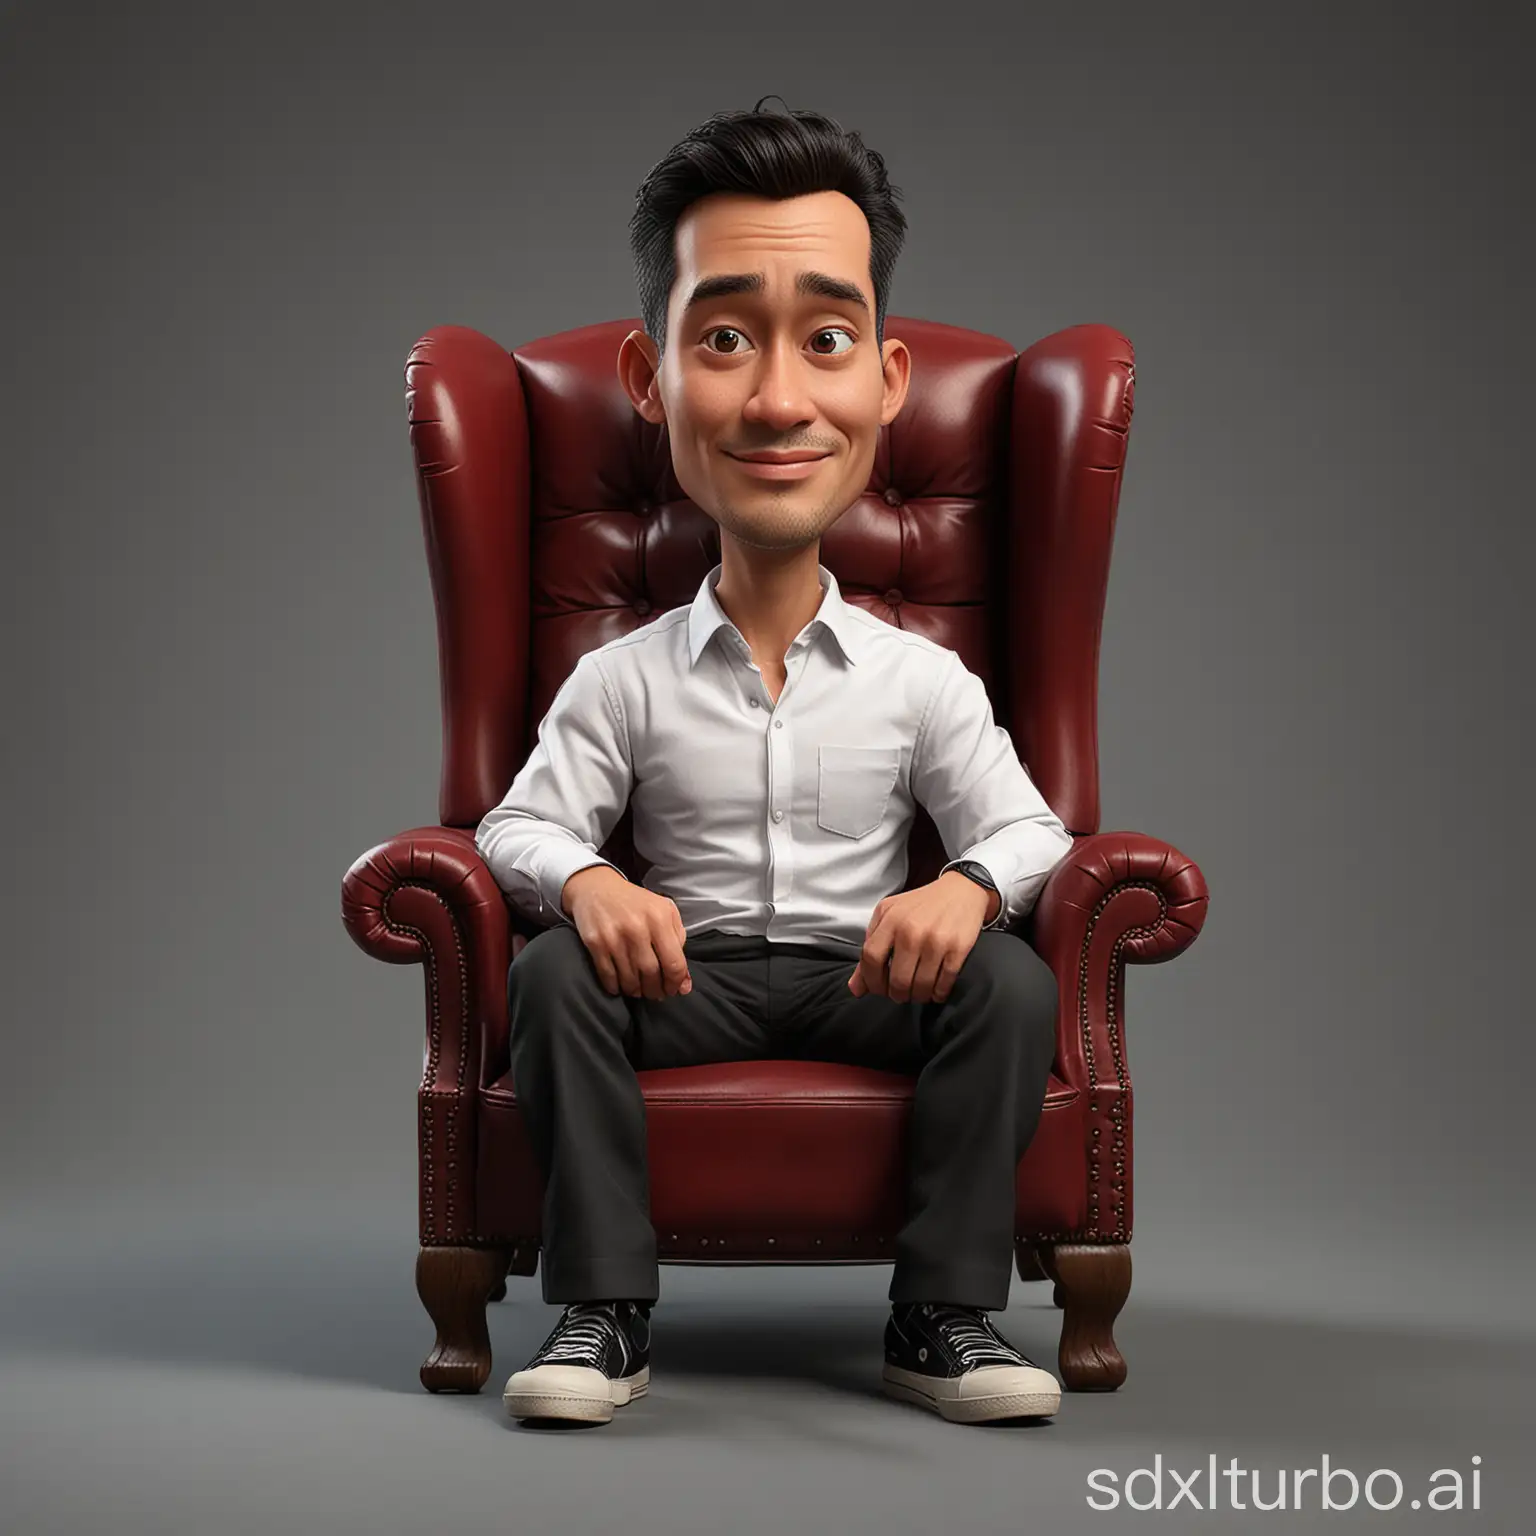 Create a caricature 3D Realistic Disney pixar style full body with a big head. an Indonesian male photographer, a 40 year old man, is sitting relaxed in a classic dark red wingback wooden chair, the wood texture is clear. Wearing a white t-shirt covered with a black suit, wearing black cloth trousers. Wearing white shoes sneakers. Sit with your legs crossed, your right hand holding a camera, your left hand placed on the edge of the chair. The background should contrast with the color of the chair and clothing,enhancing the overall composition of the picture. Use soft photography lighting, dramatic overhead lighting, very high image quality, clear character details, UHD, 16k.